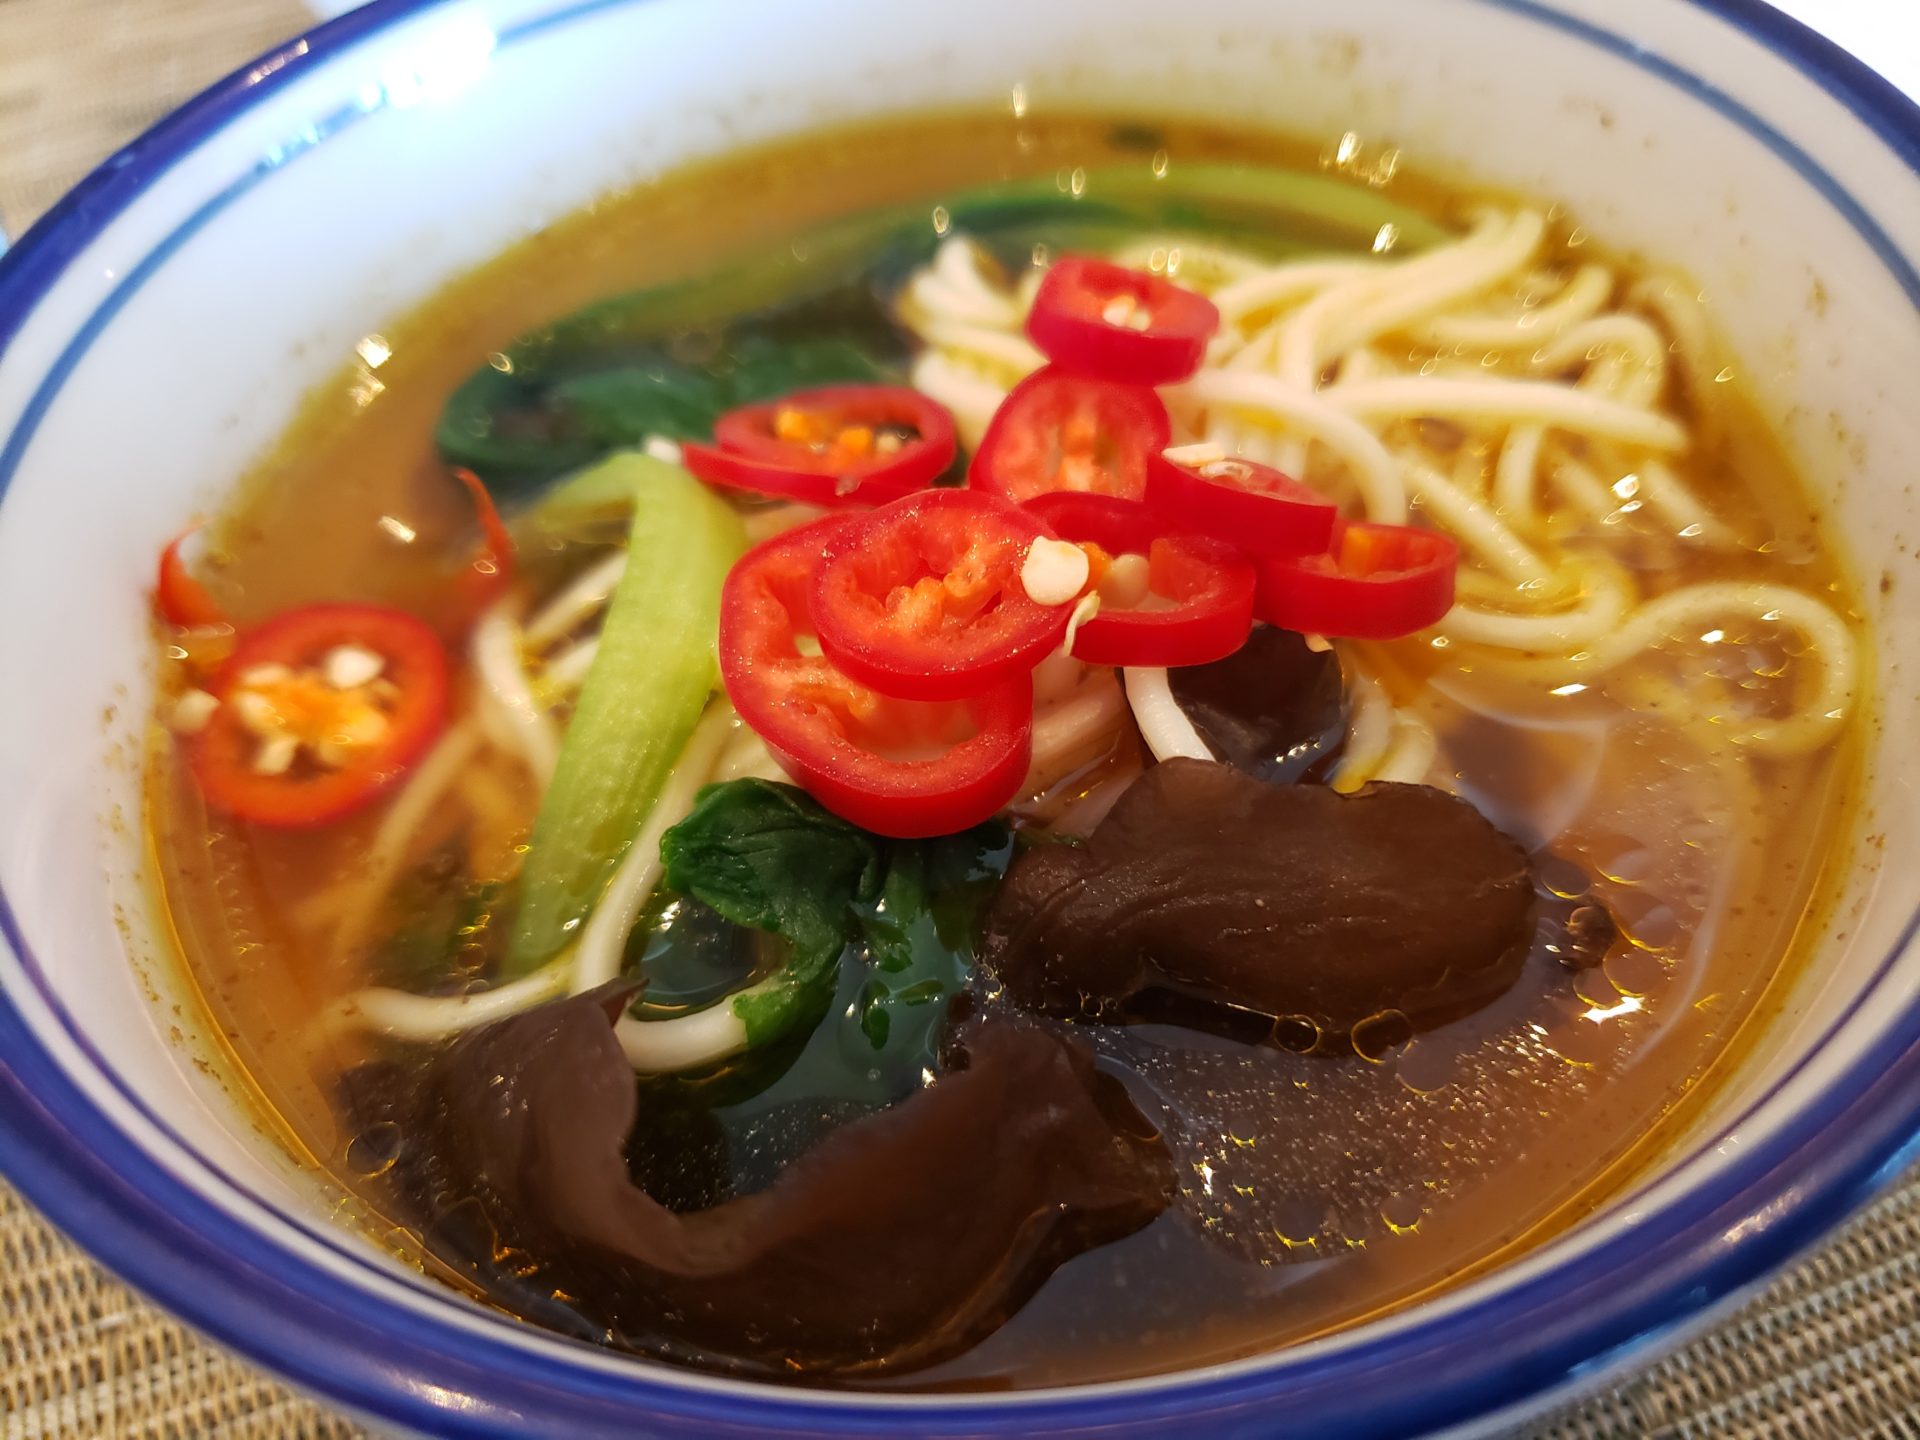 a bowl of soup with noodles and vegetables